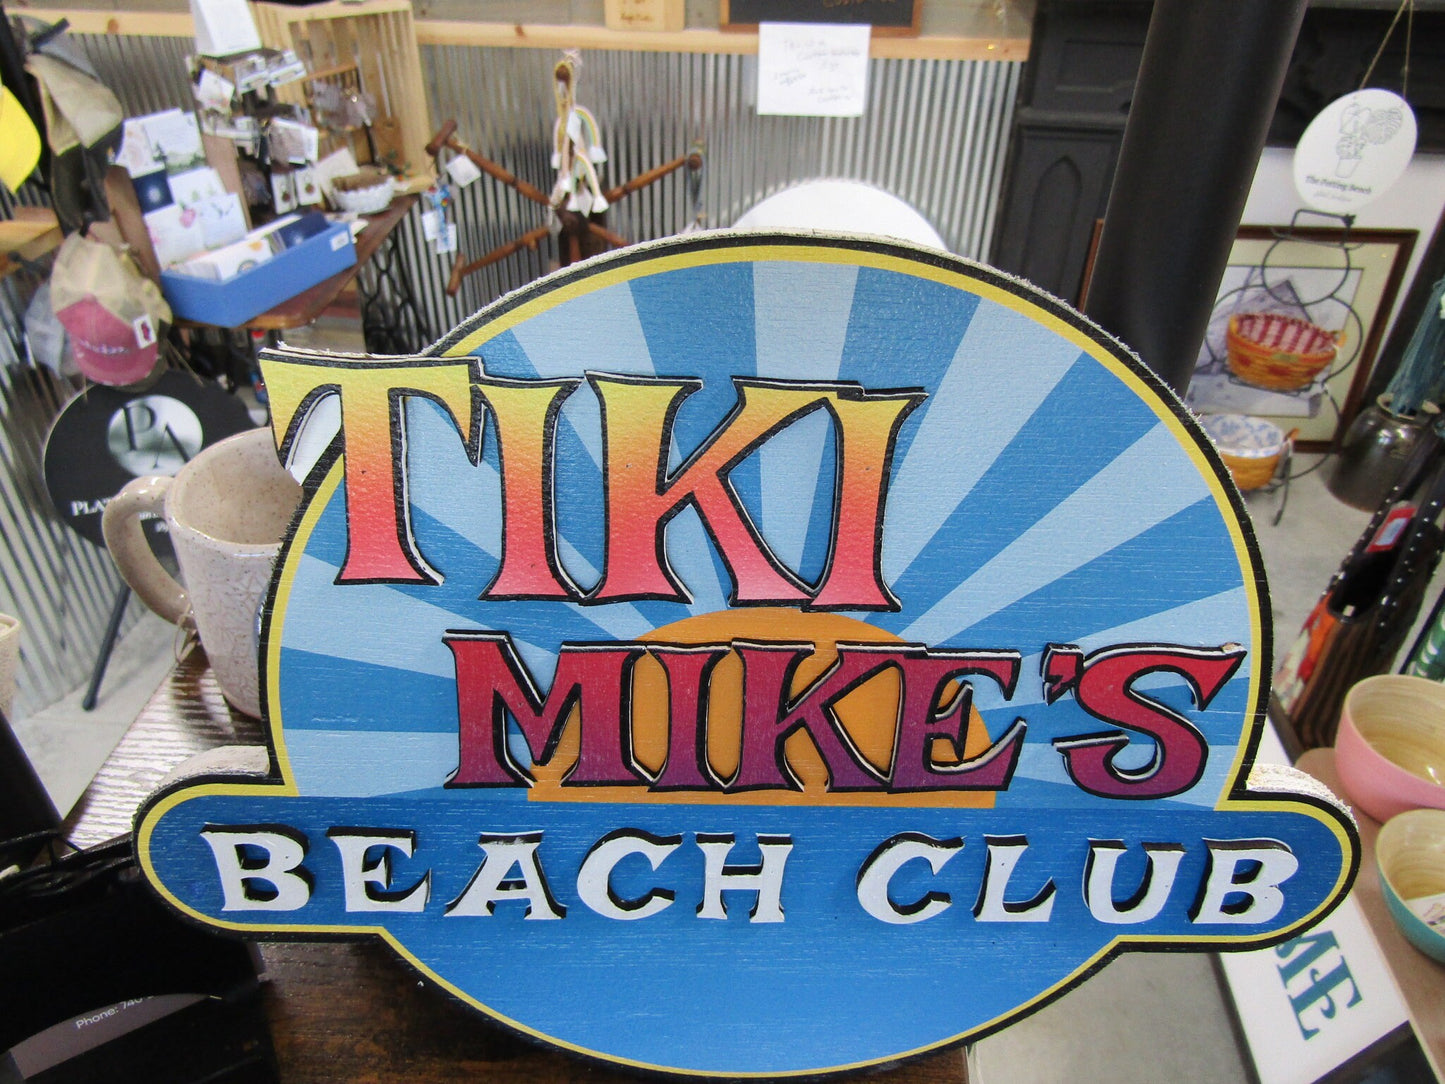 Custom Sign Contoured Business Commerical Signage Beach Club Bar and Grille Made to Order Tiki Tropical Logo Wooden Handmade Sunny Rays